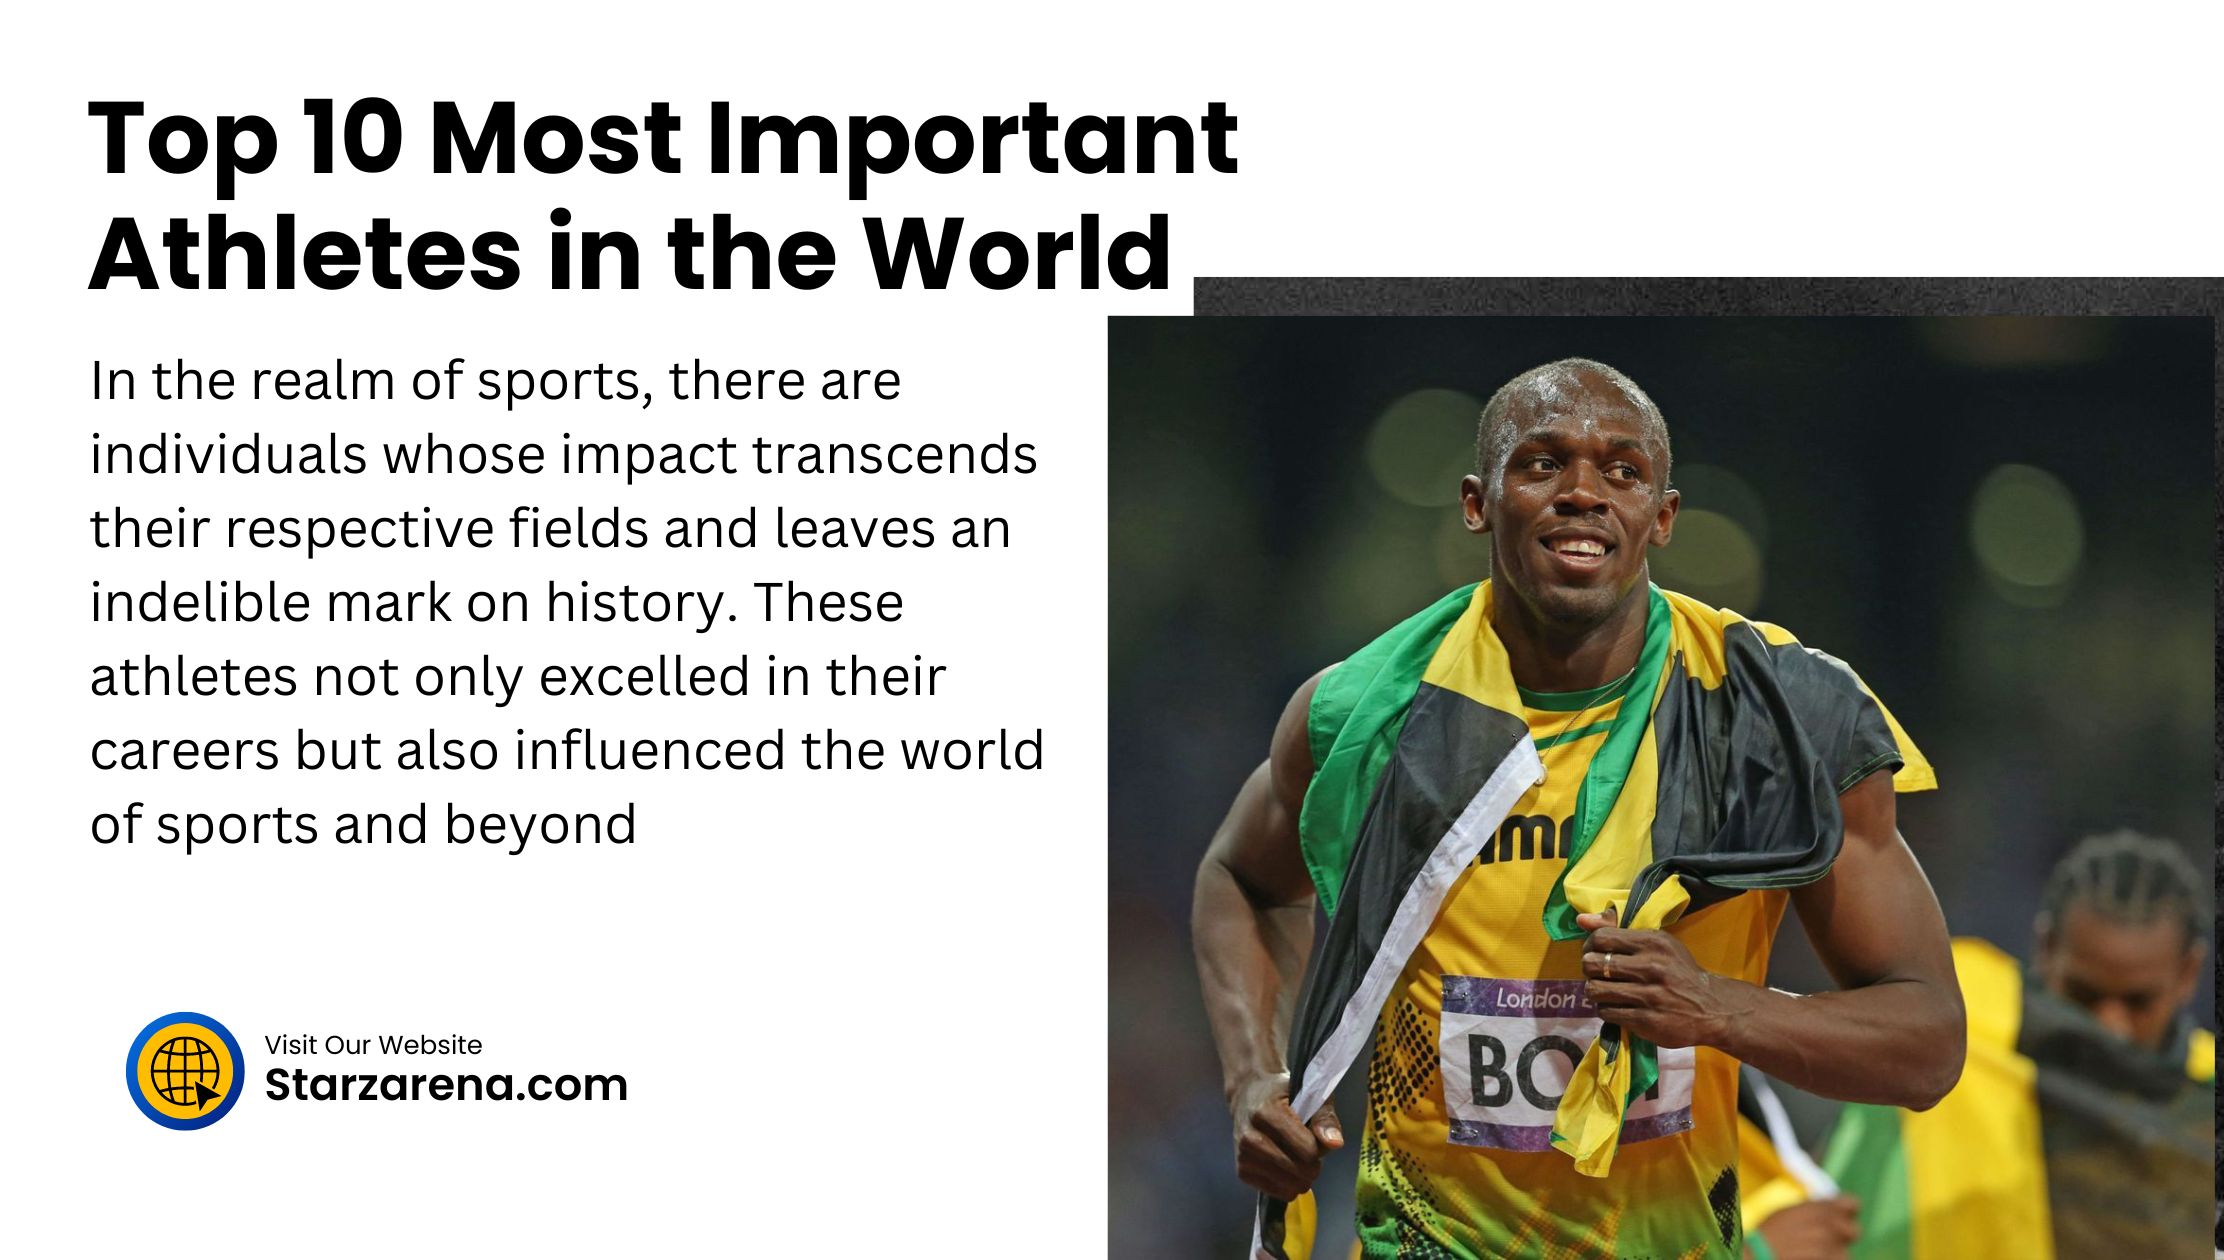 Top 10 Most Important Athletes in the World